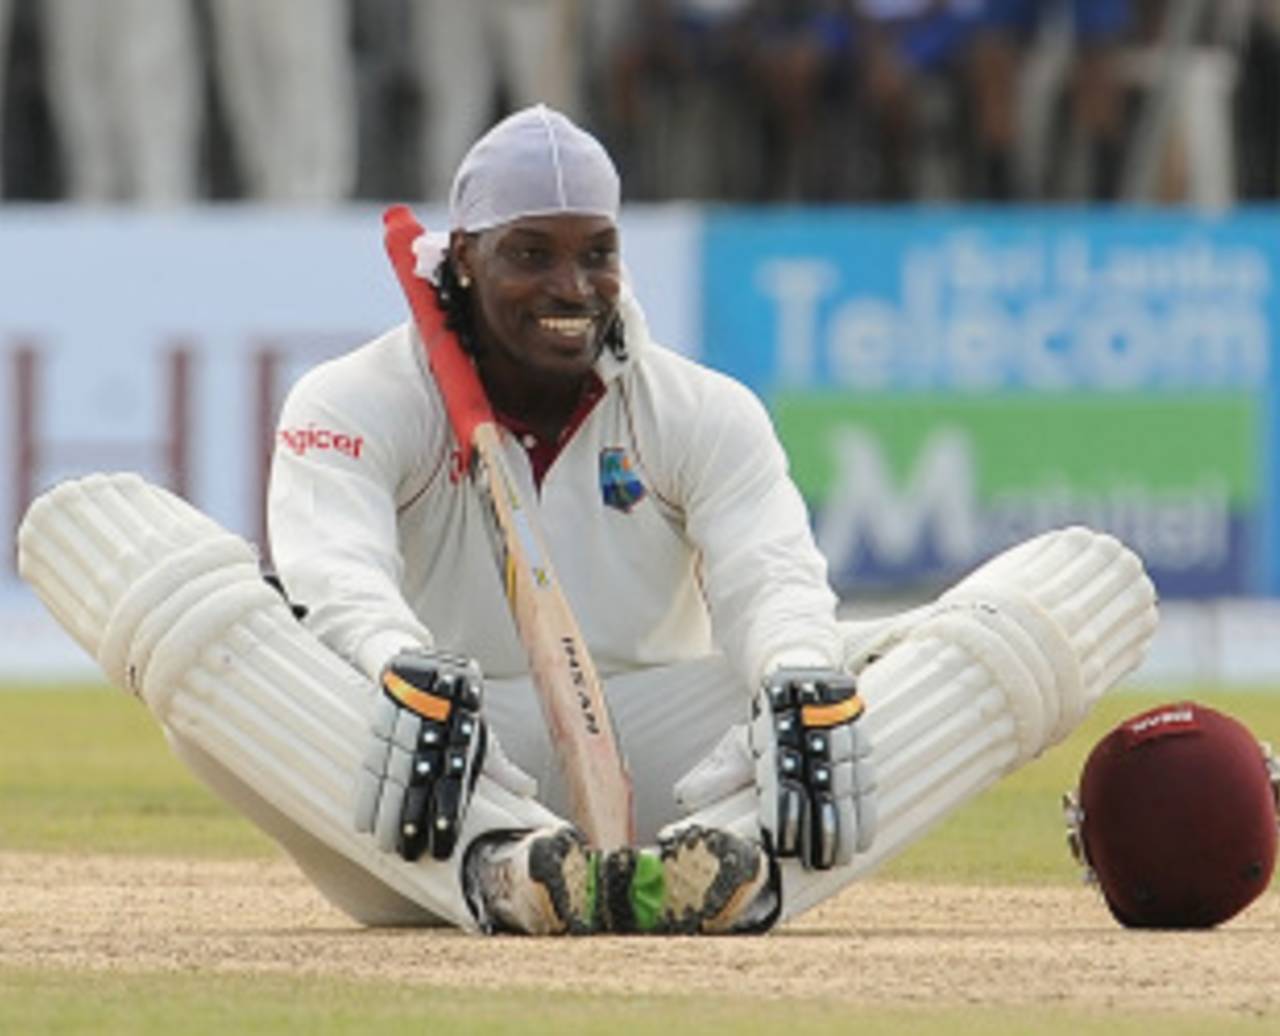 Chris Gayle sits on the pitch after reaching his hundred, Sri Lanka v West Indies, 1st Test, Galle, 1st day, November 15, 2010